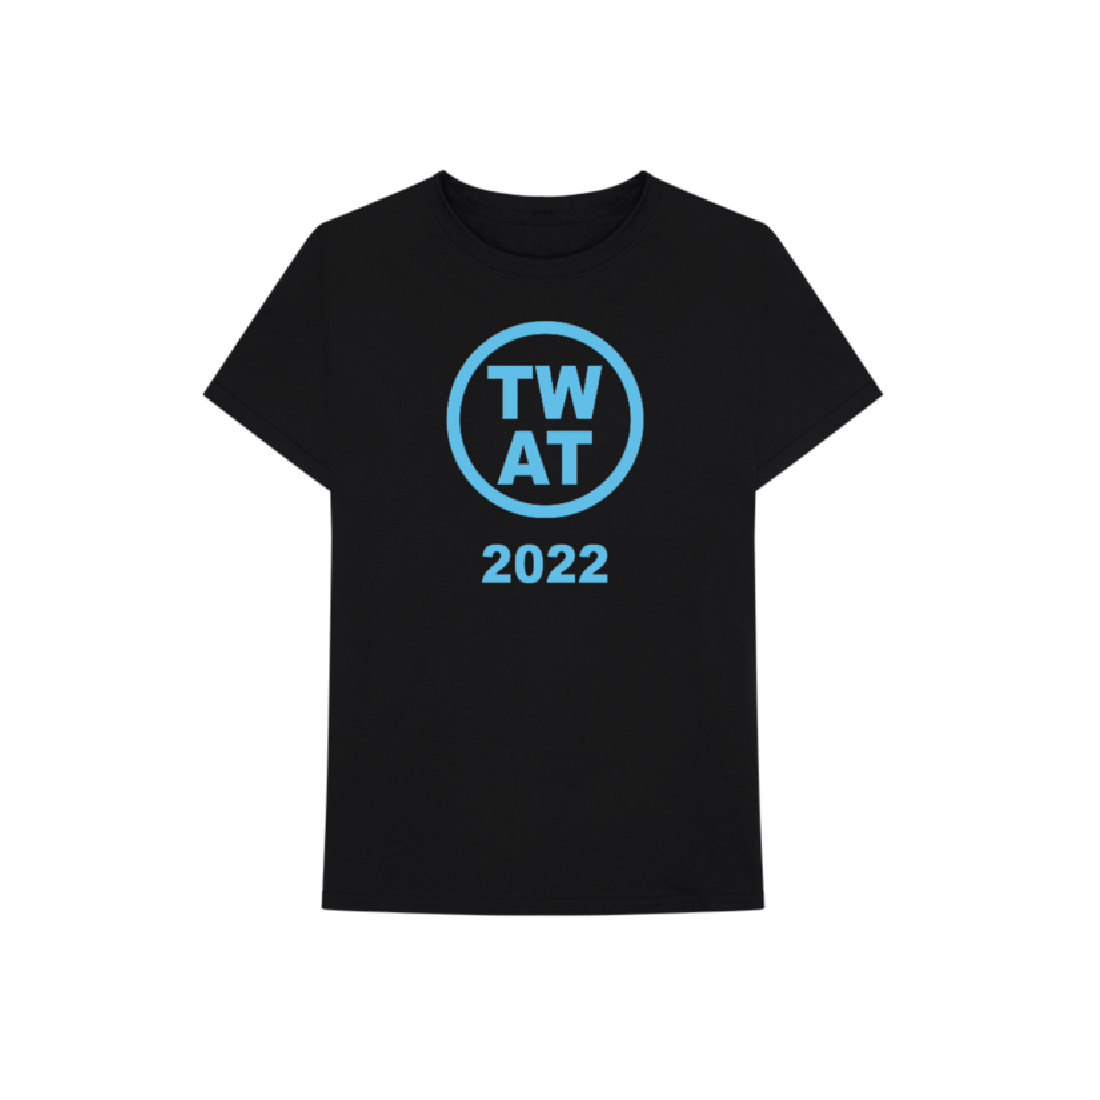 The Wanted - The Wanted 2022 Tour T-Shirt